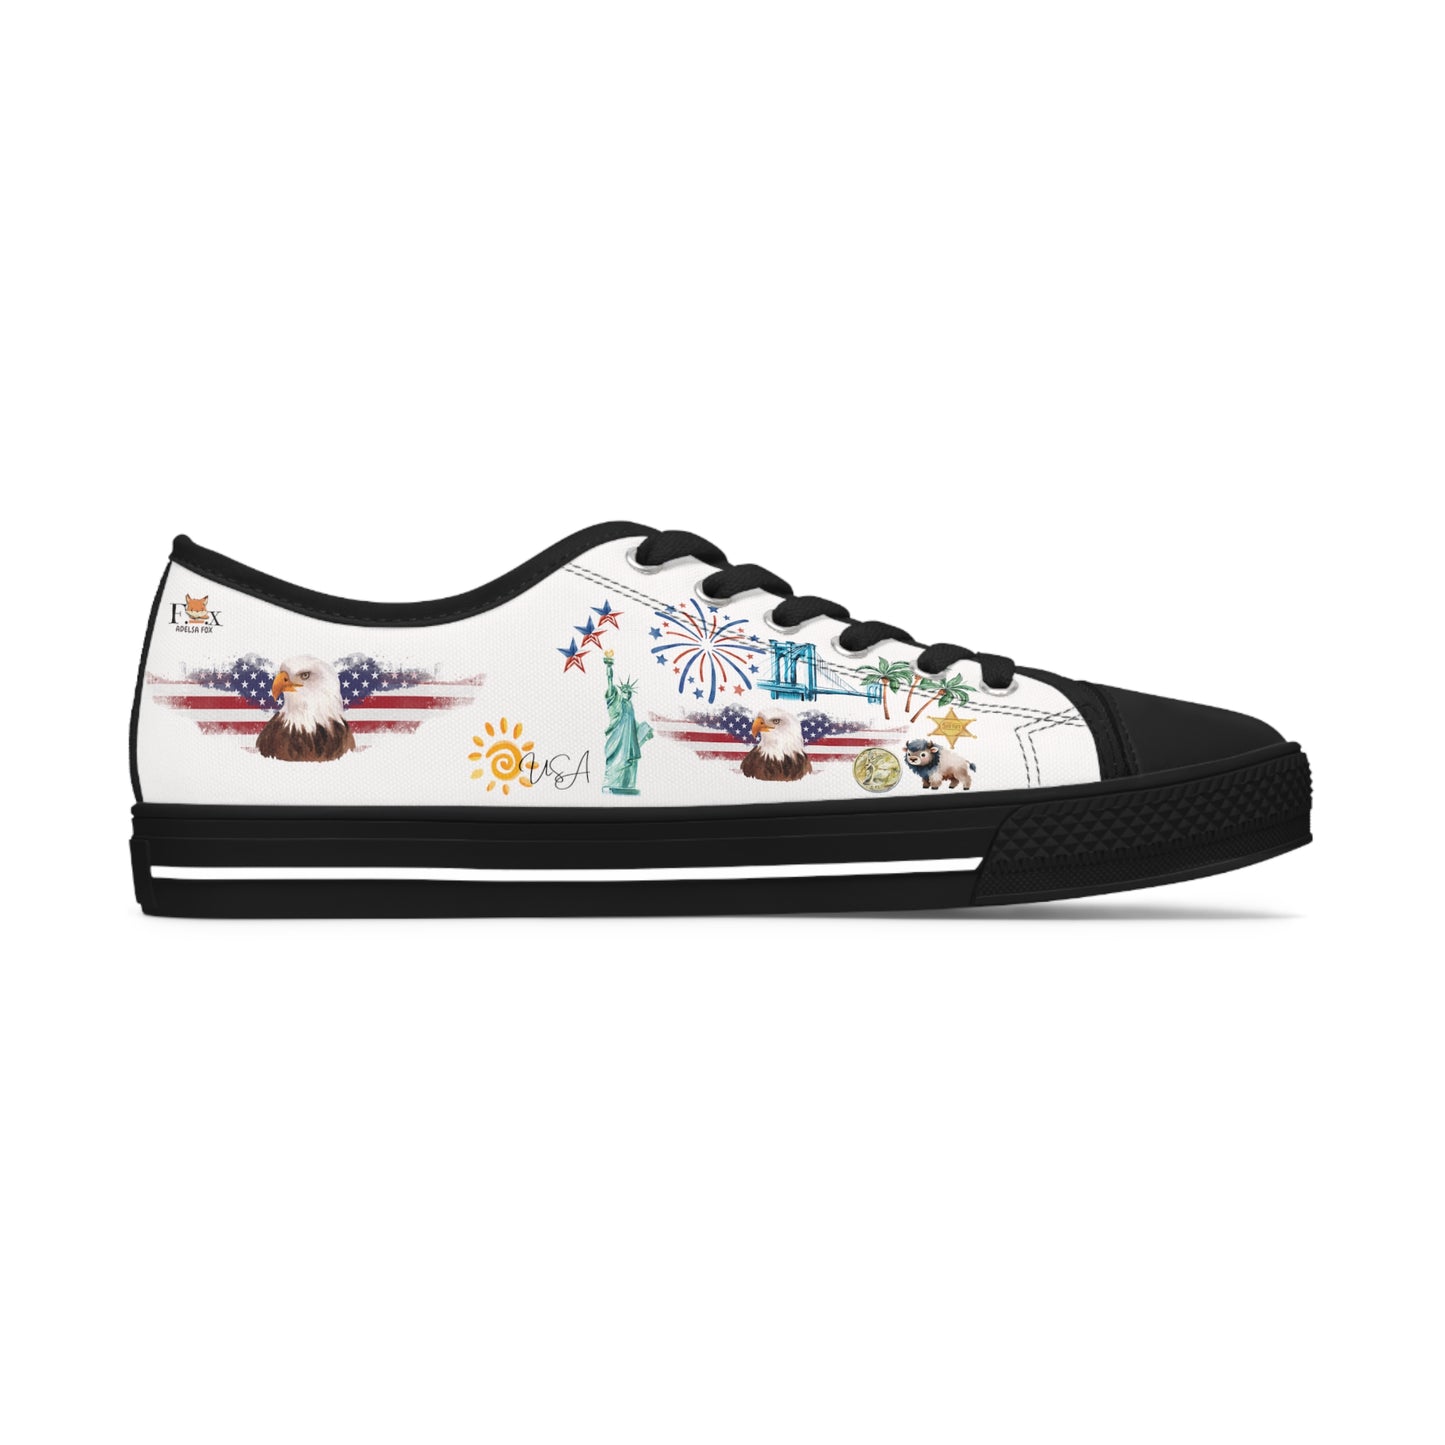 USA is calling & i must Go - First Travel Edition - White Background Sneakers